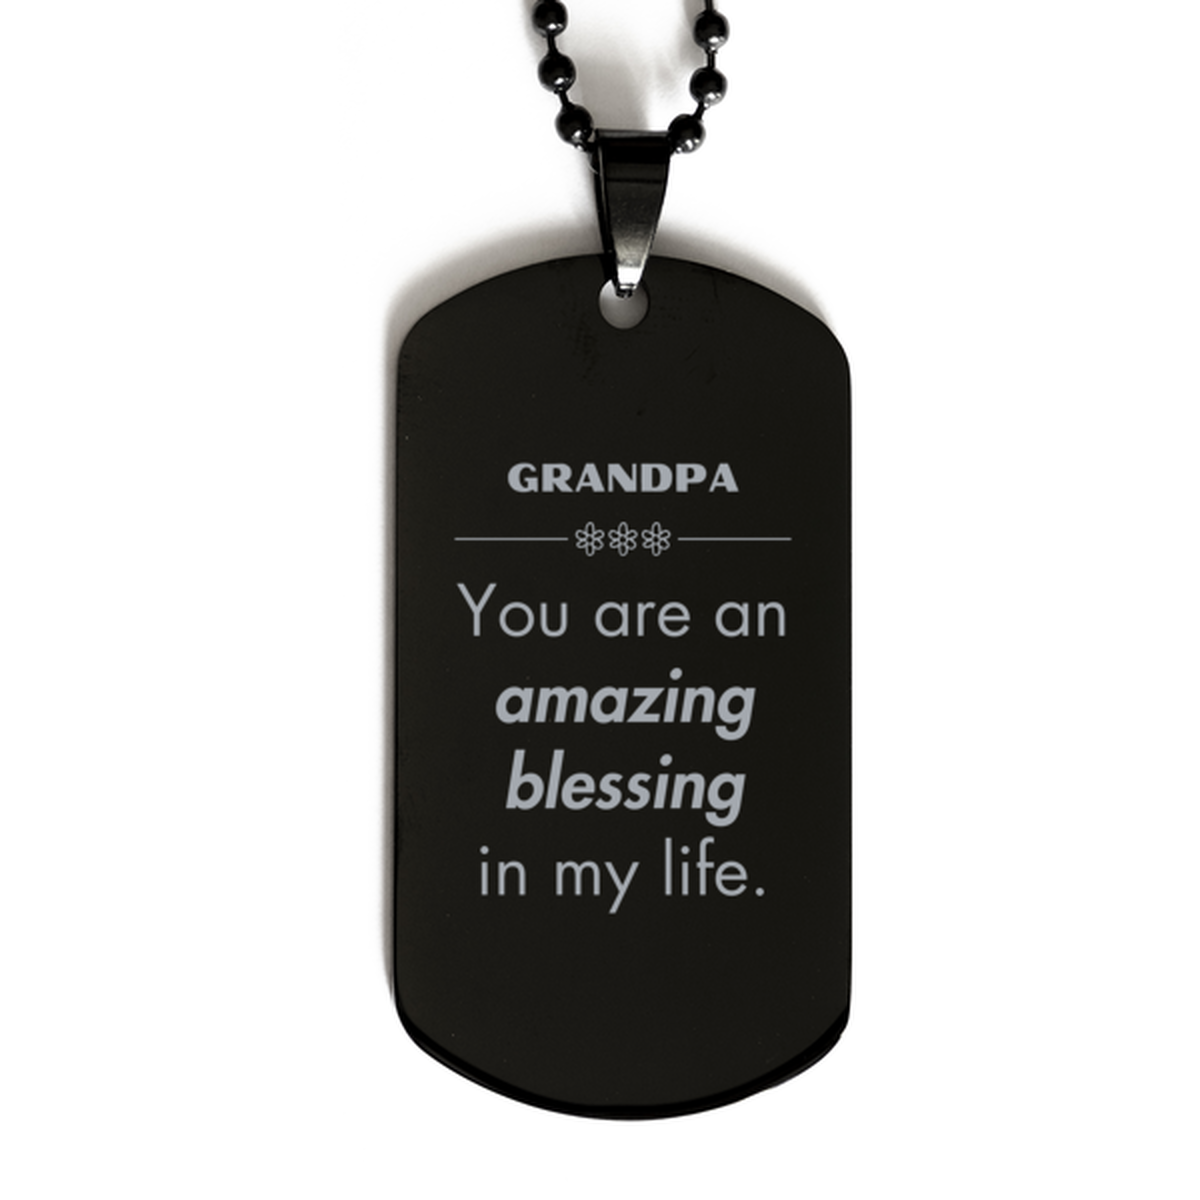 Grandpa Black Dog Tag, You are an amazing blessing in my life, Thank You Gifts For Grandpa, Inspirational Birthday Christmas Unique Gifts For Grandpa